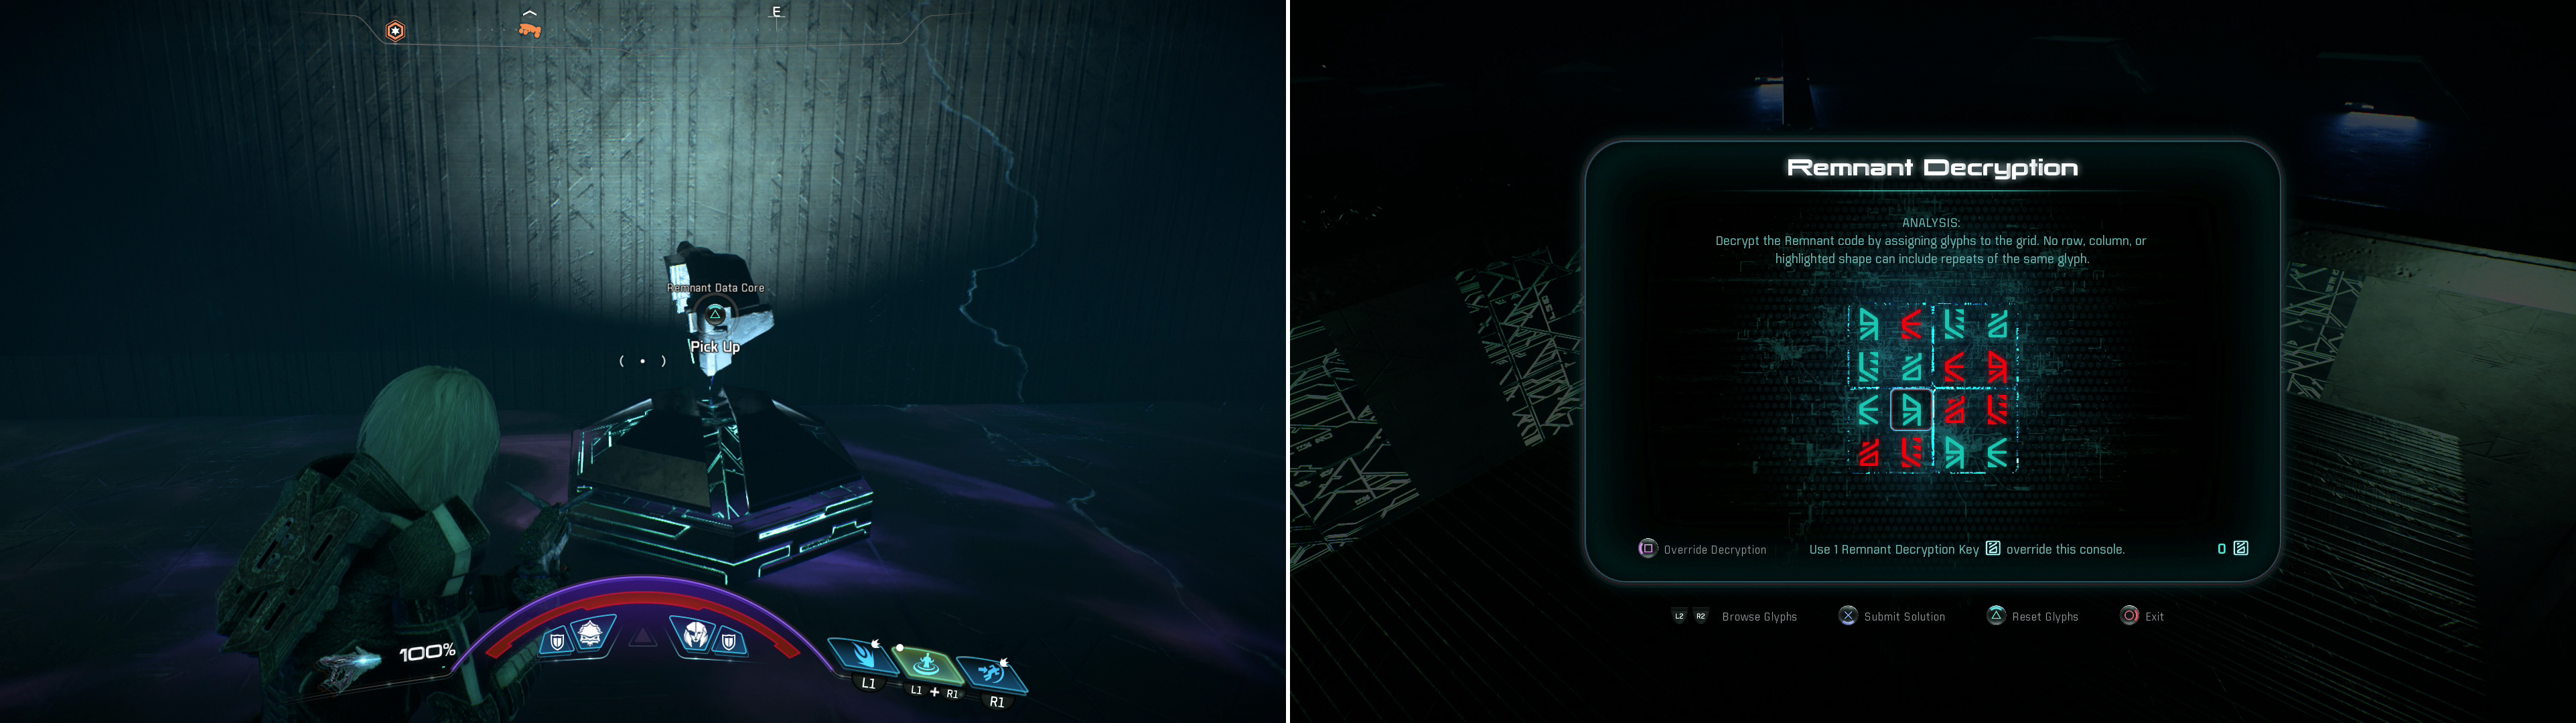 Grab the Remnant Data Core (left) and scan some glyphs to solve the Remnant puzzle (right).